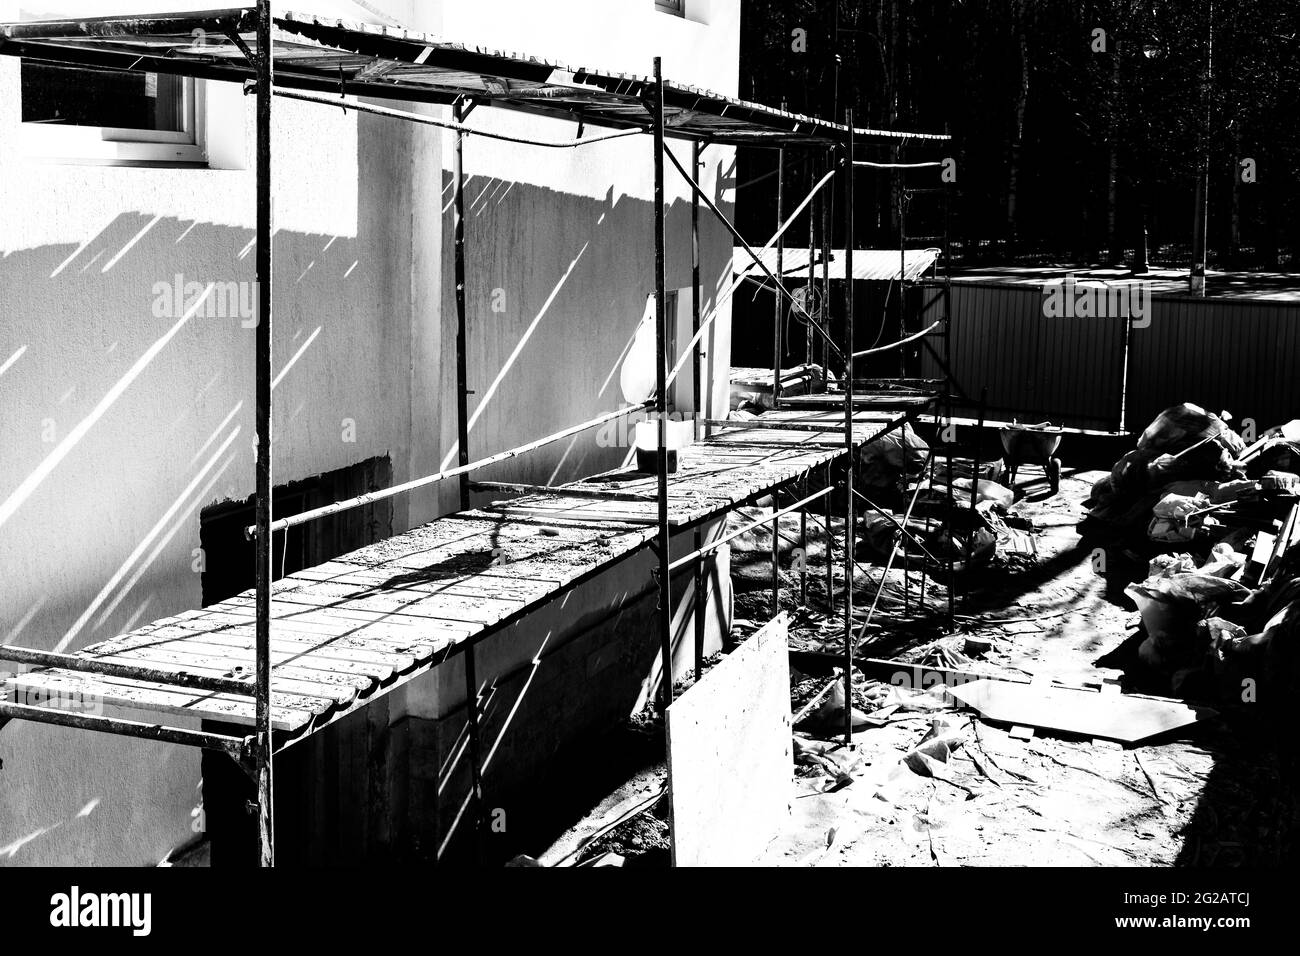 Black and white concept of building renovation with scaffolding and construction debris in the courtyard Stock Photo